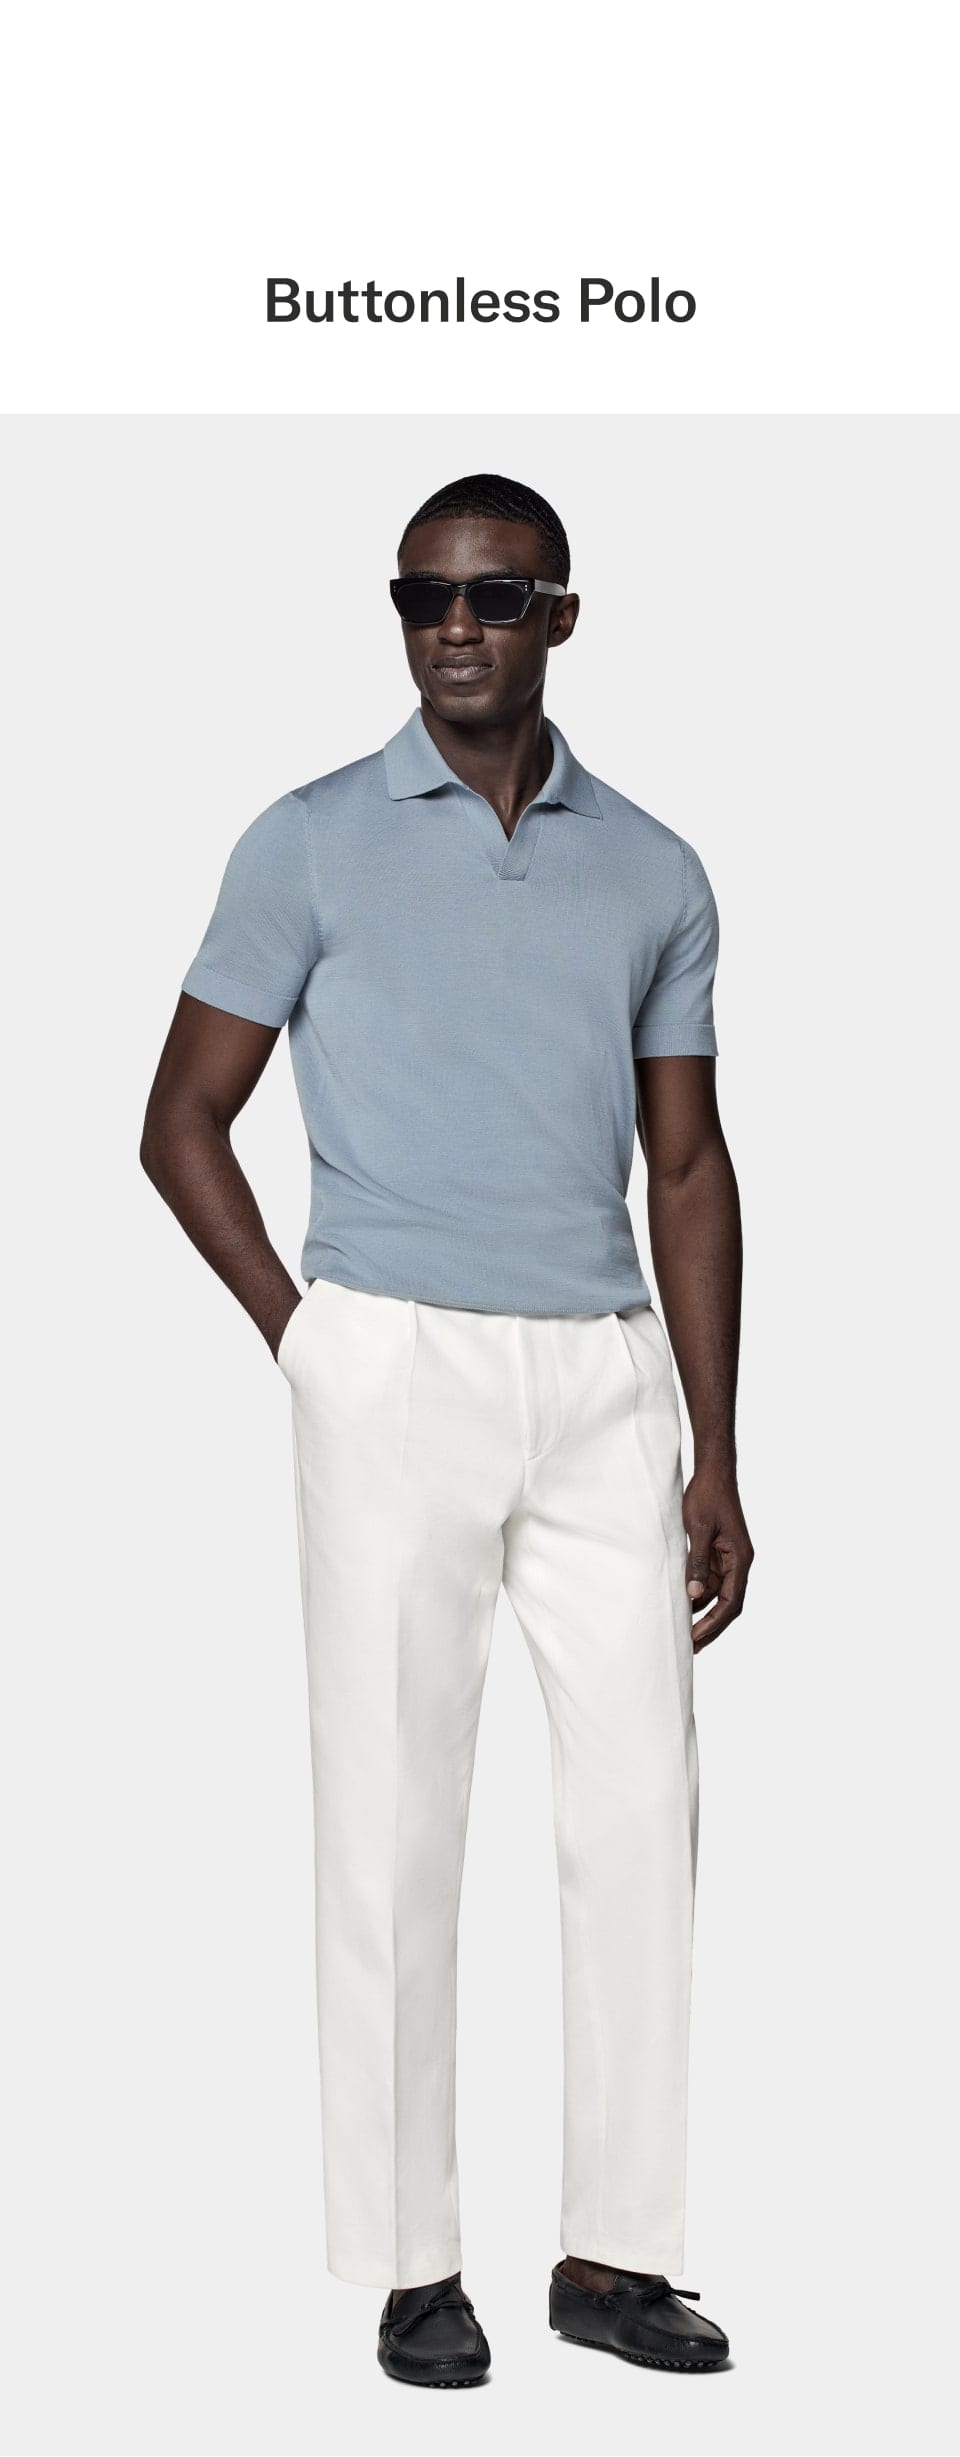 Shop the buttonless polos